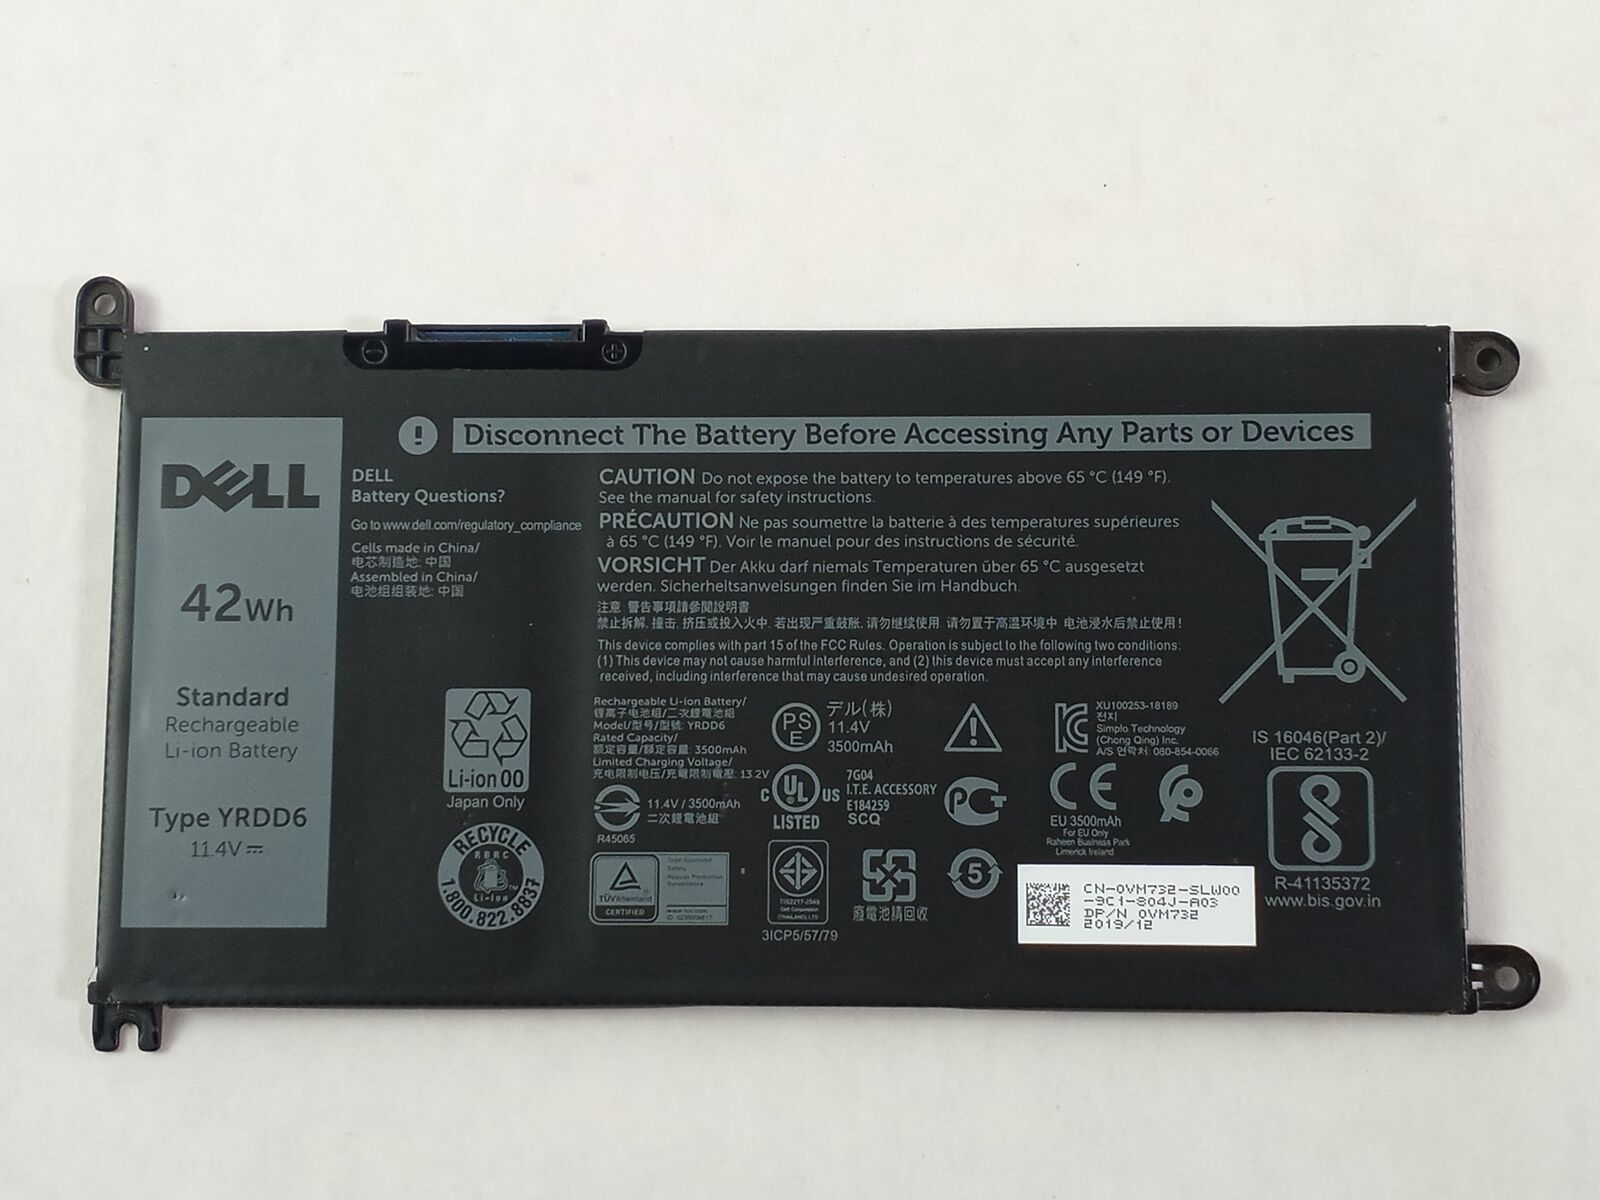 Dell YRDD6 42Wh 3 Cell Laptop Battery for Latitude 3310 / Inspiron 14